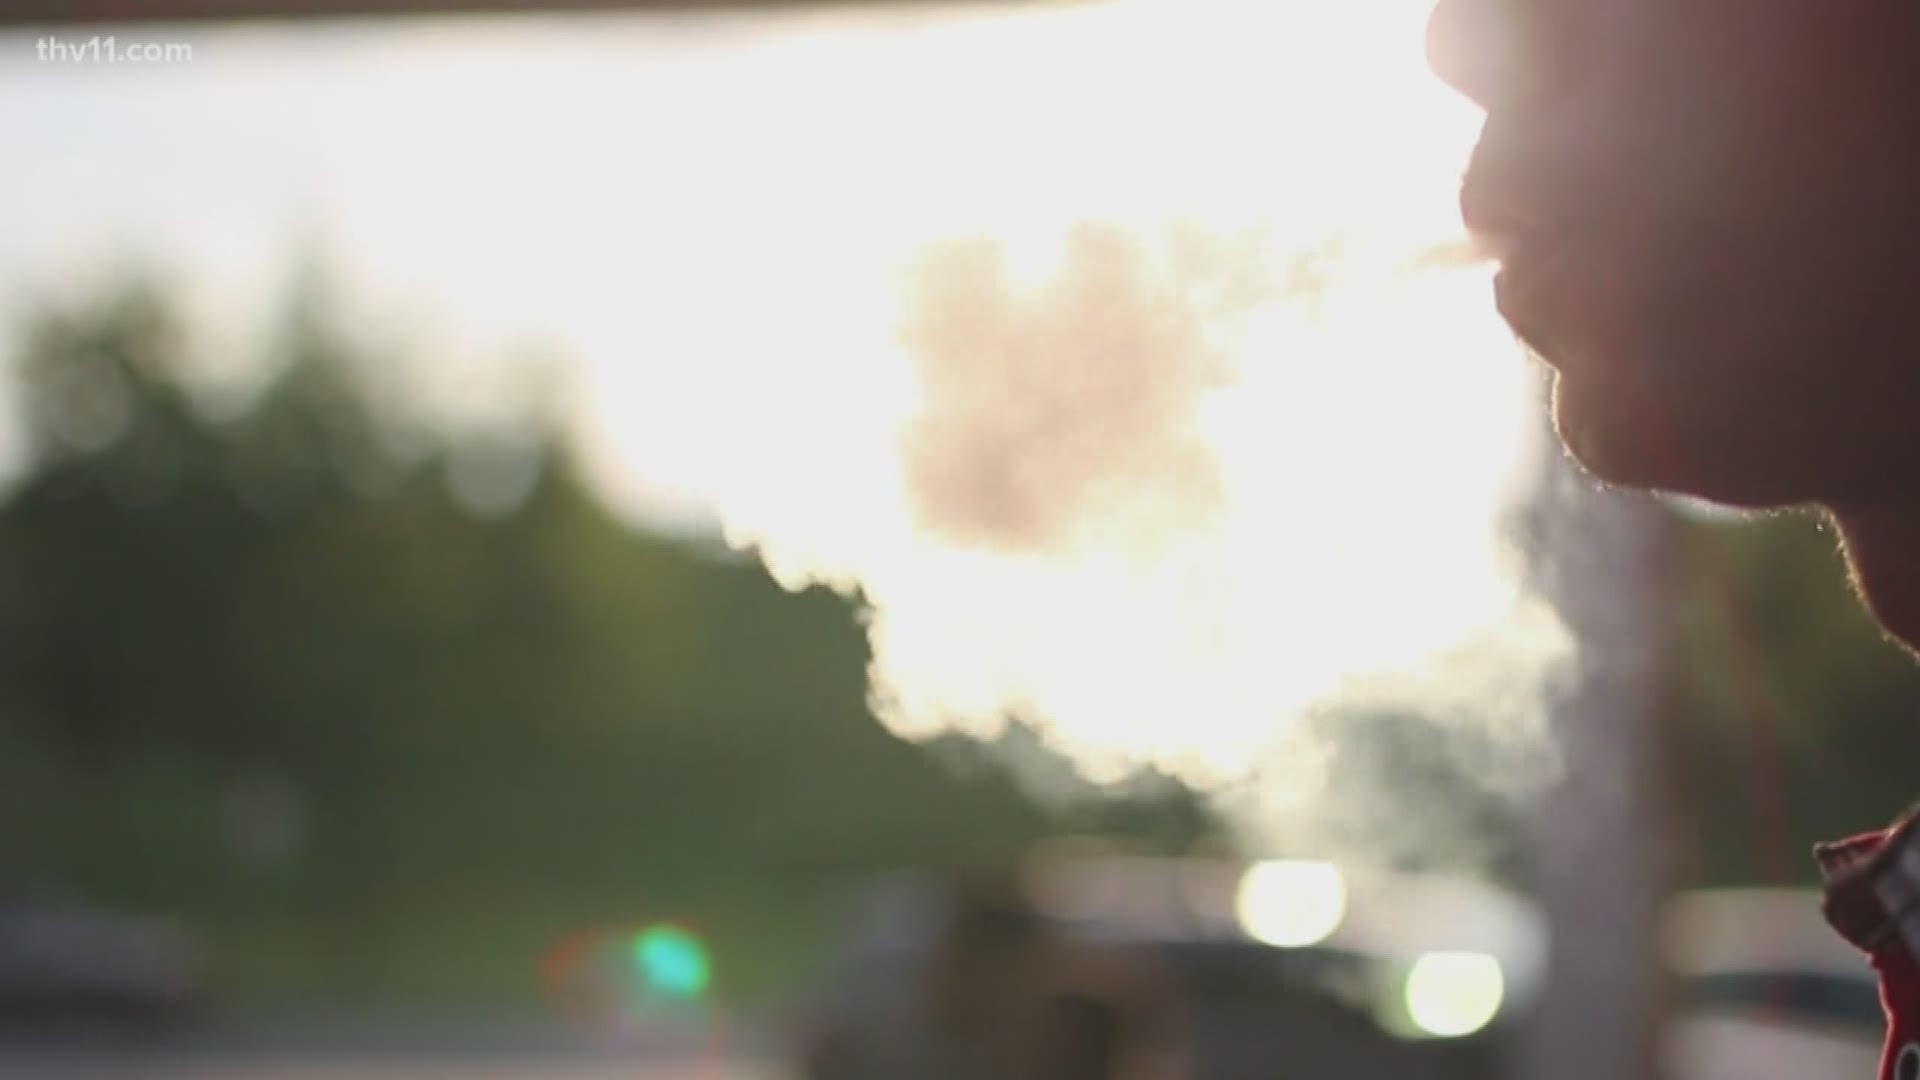 Over 200 cases of vaping-related lung disease and one death have been reported across the country.